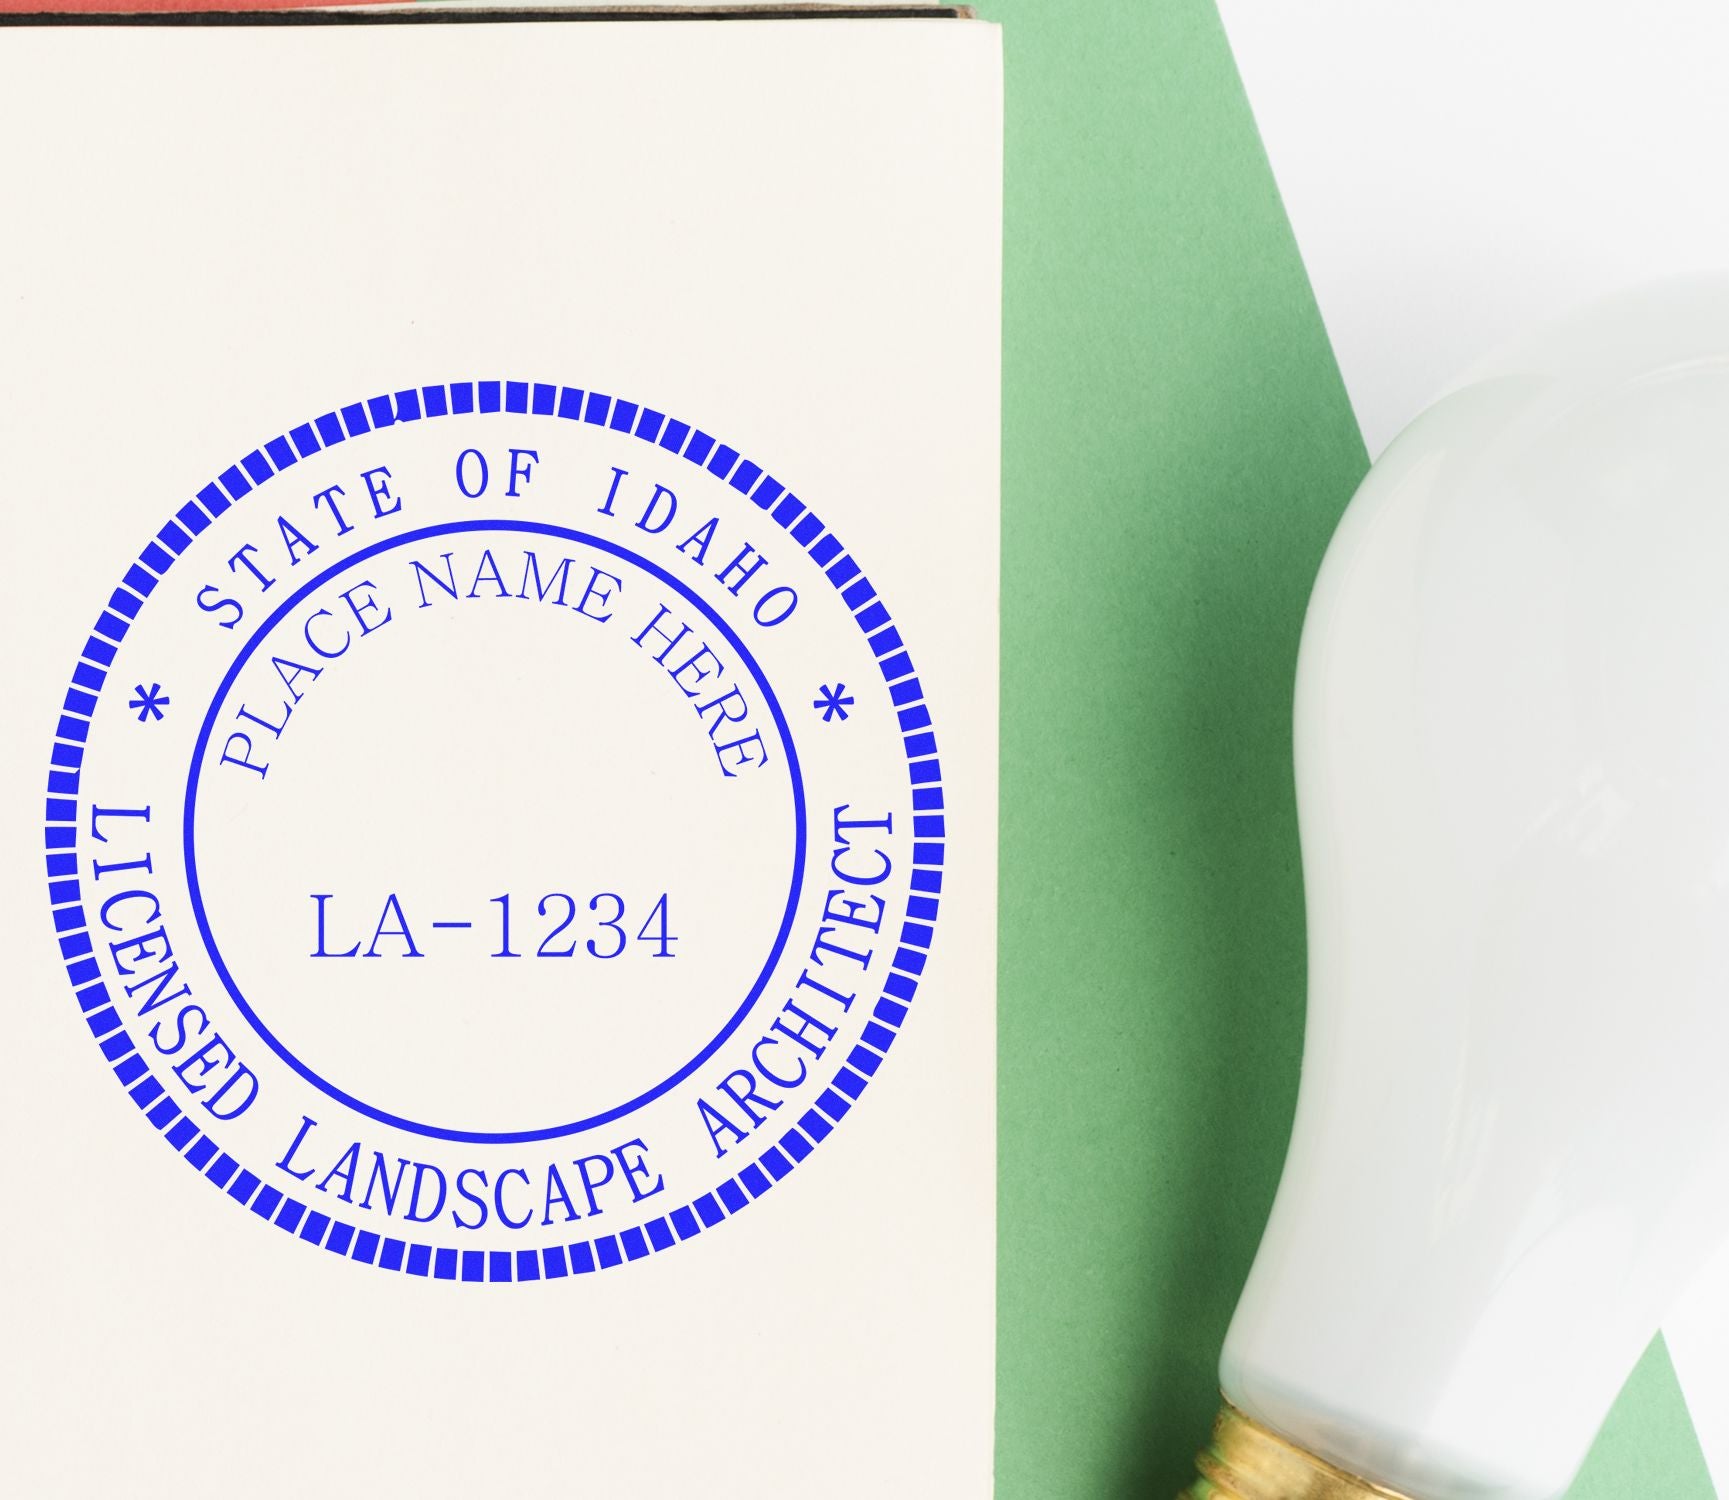 This paper is stamped with a sample imprint of the Self-Inking Idaho Landscape Architect Stamp, signifying its quality and reliability.